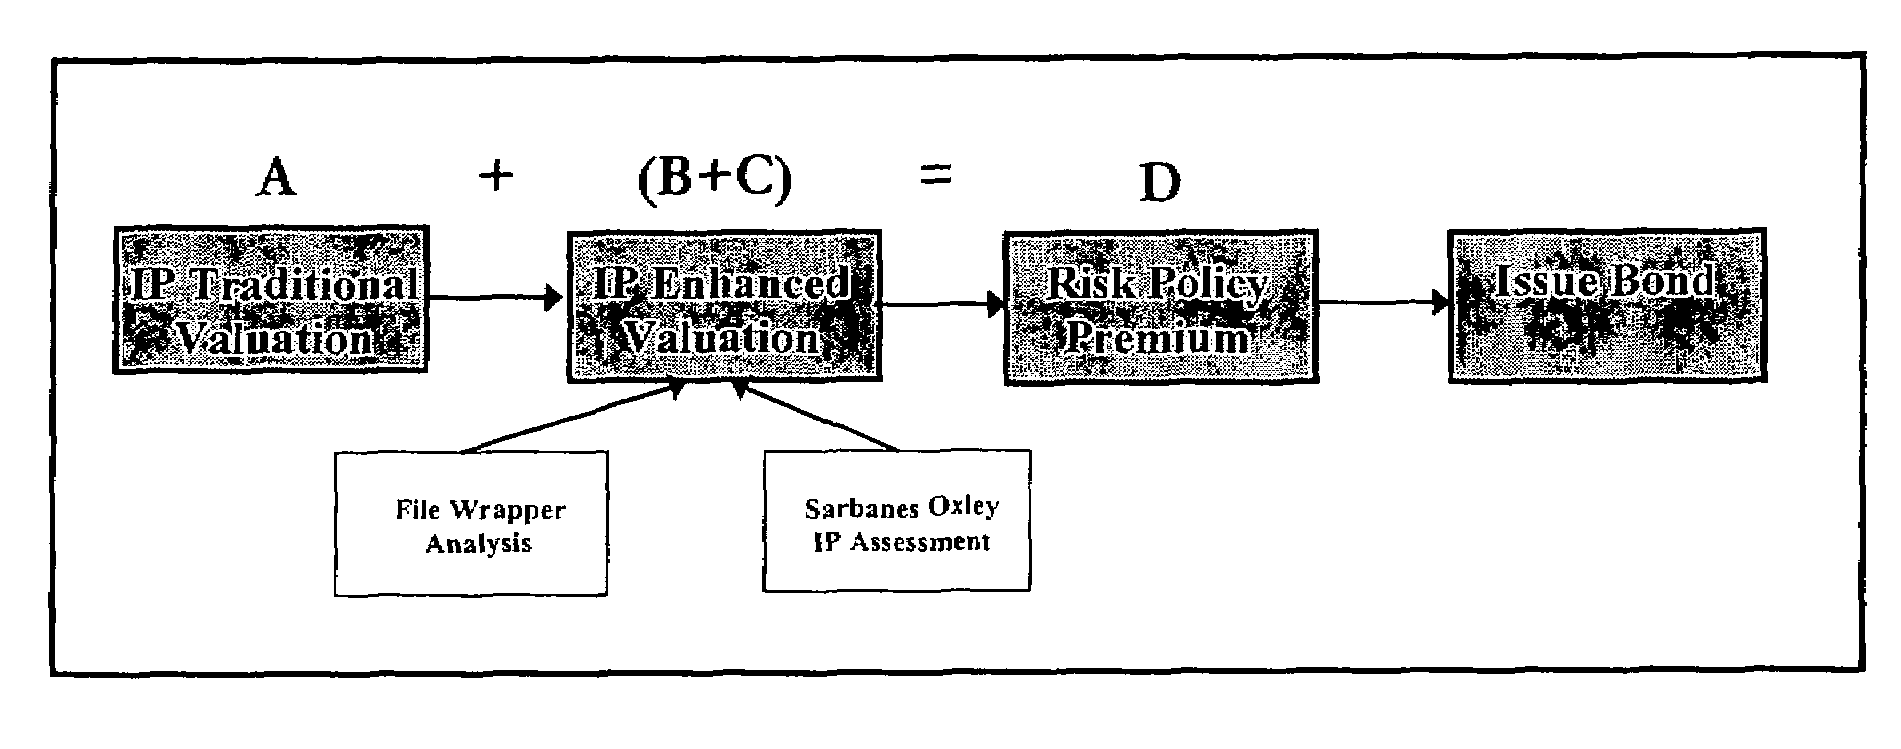 Method of appraising and insuring intellectual property